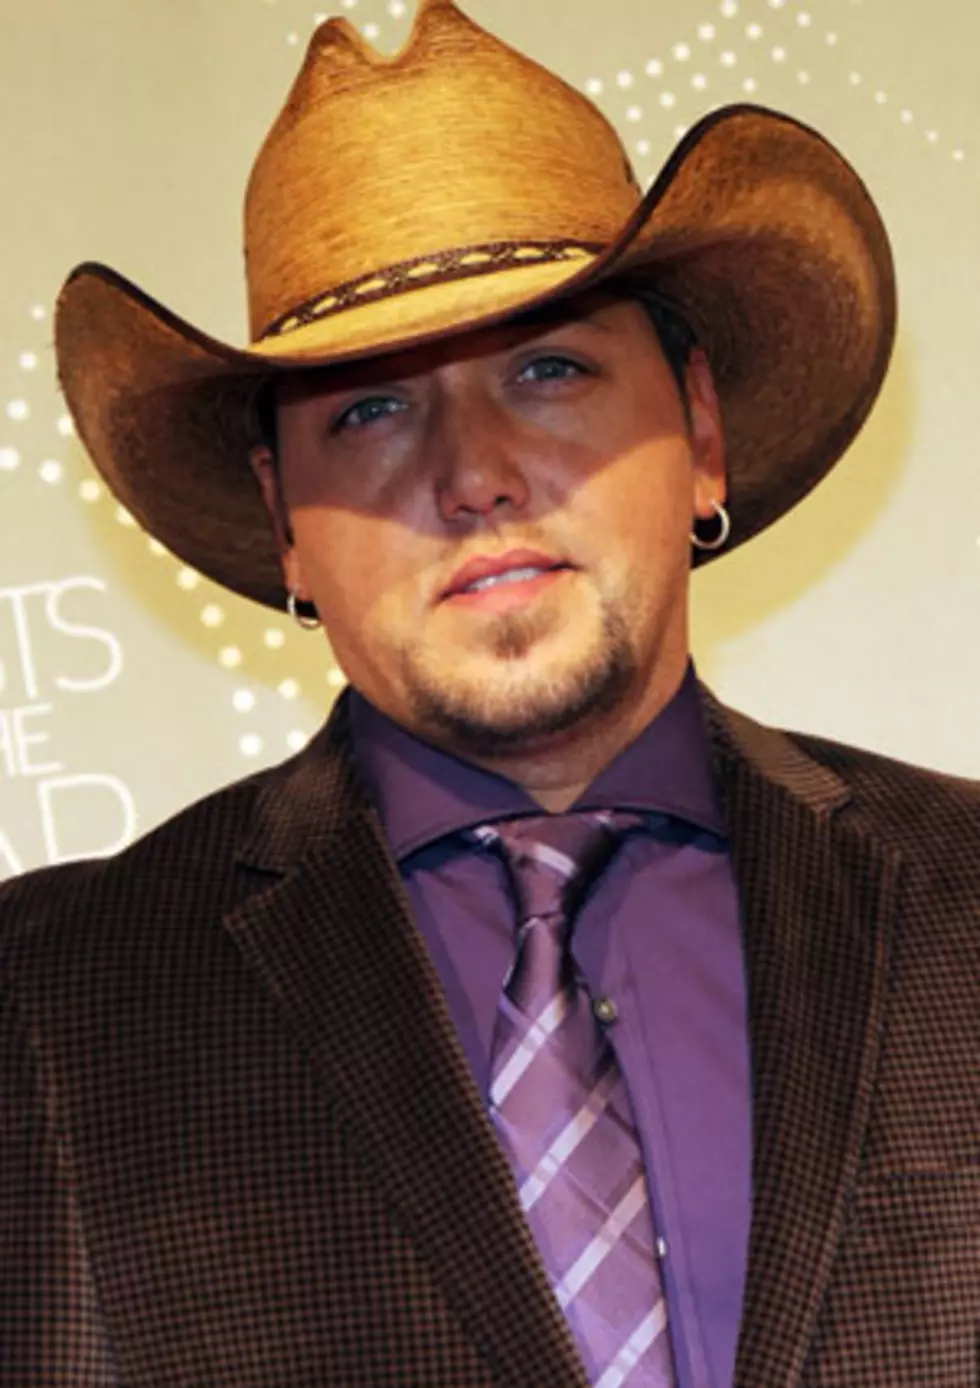 Mean Aldean #1 and comin’ to KY!